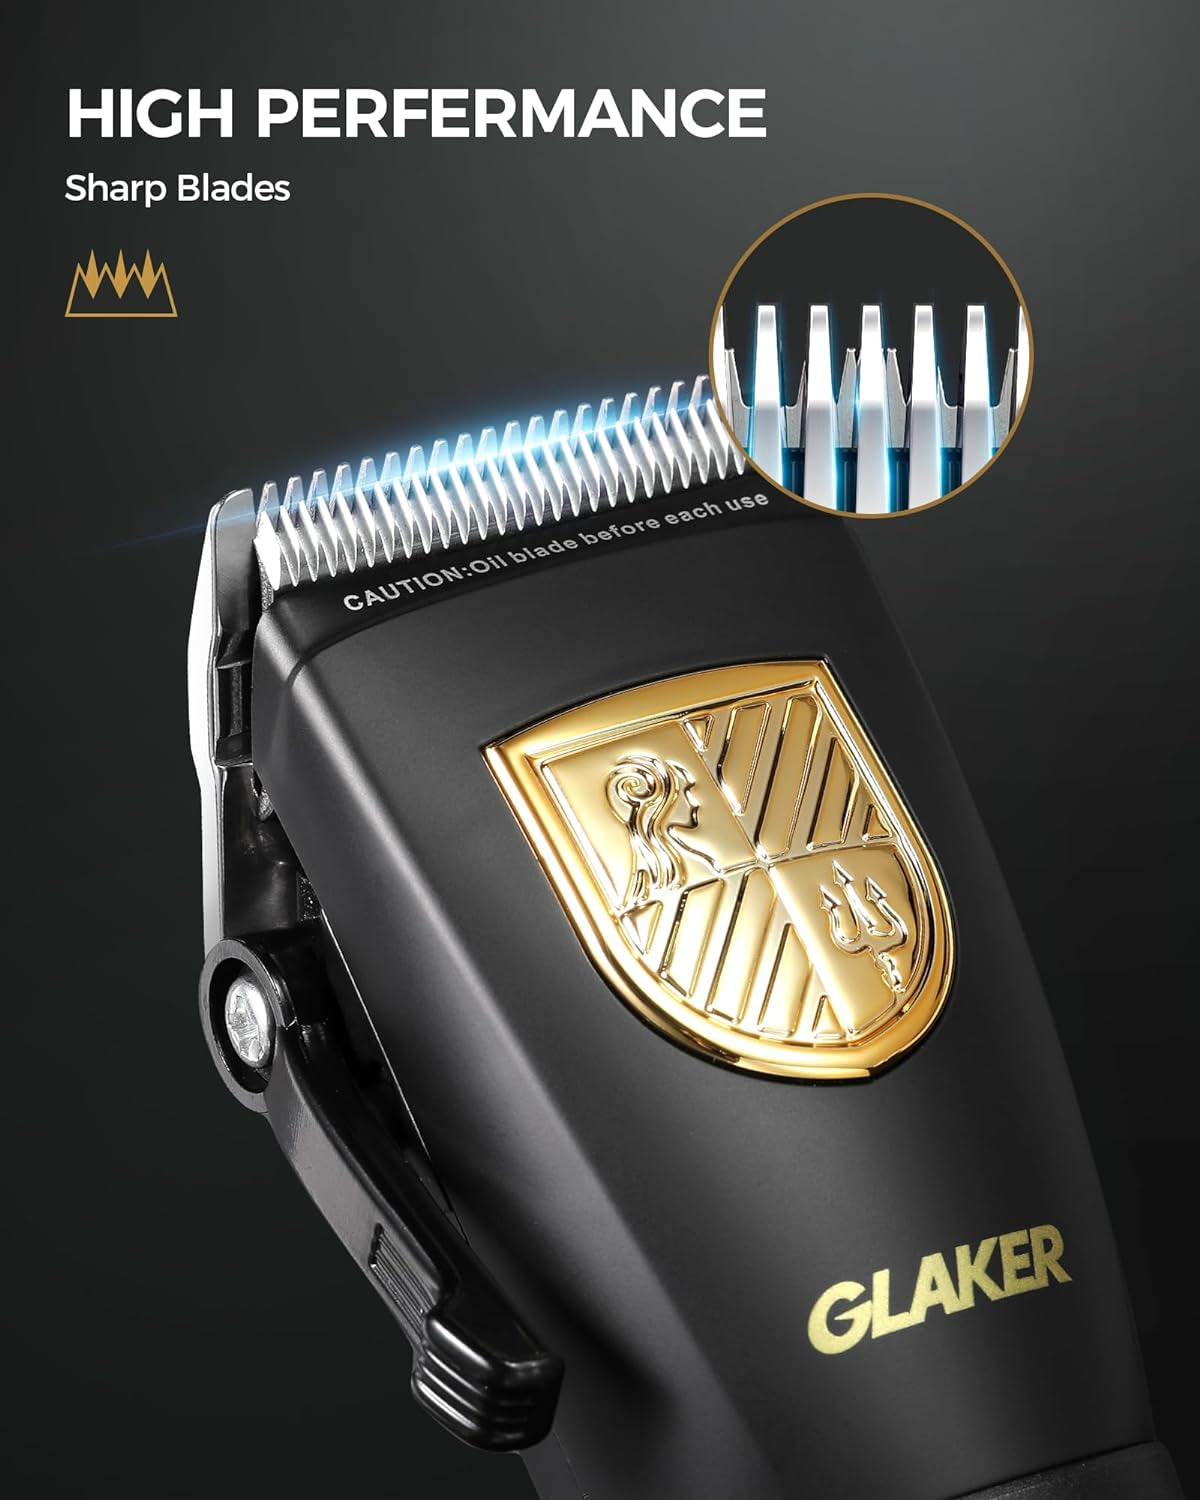 Hair Clippers for Men Professional, Cordless Clippers for Hair Cutting, Mens Hair Clippers and Trimmer Kit for Barber with LED Display 15 Guide Combs,Mens Christmas Gifts